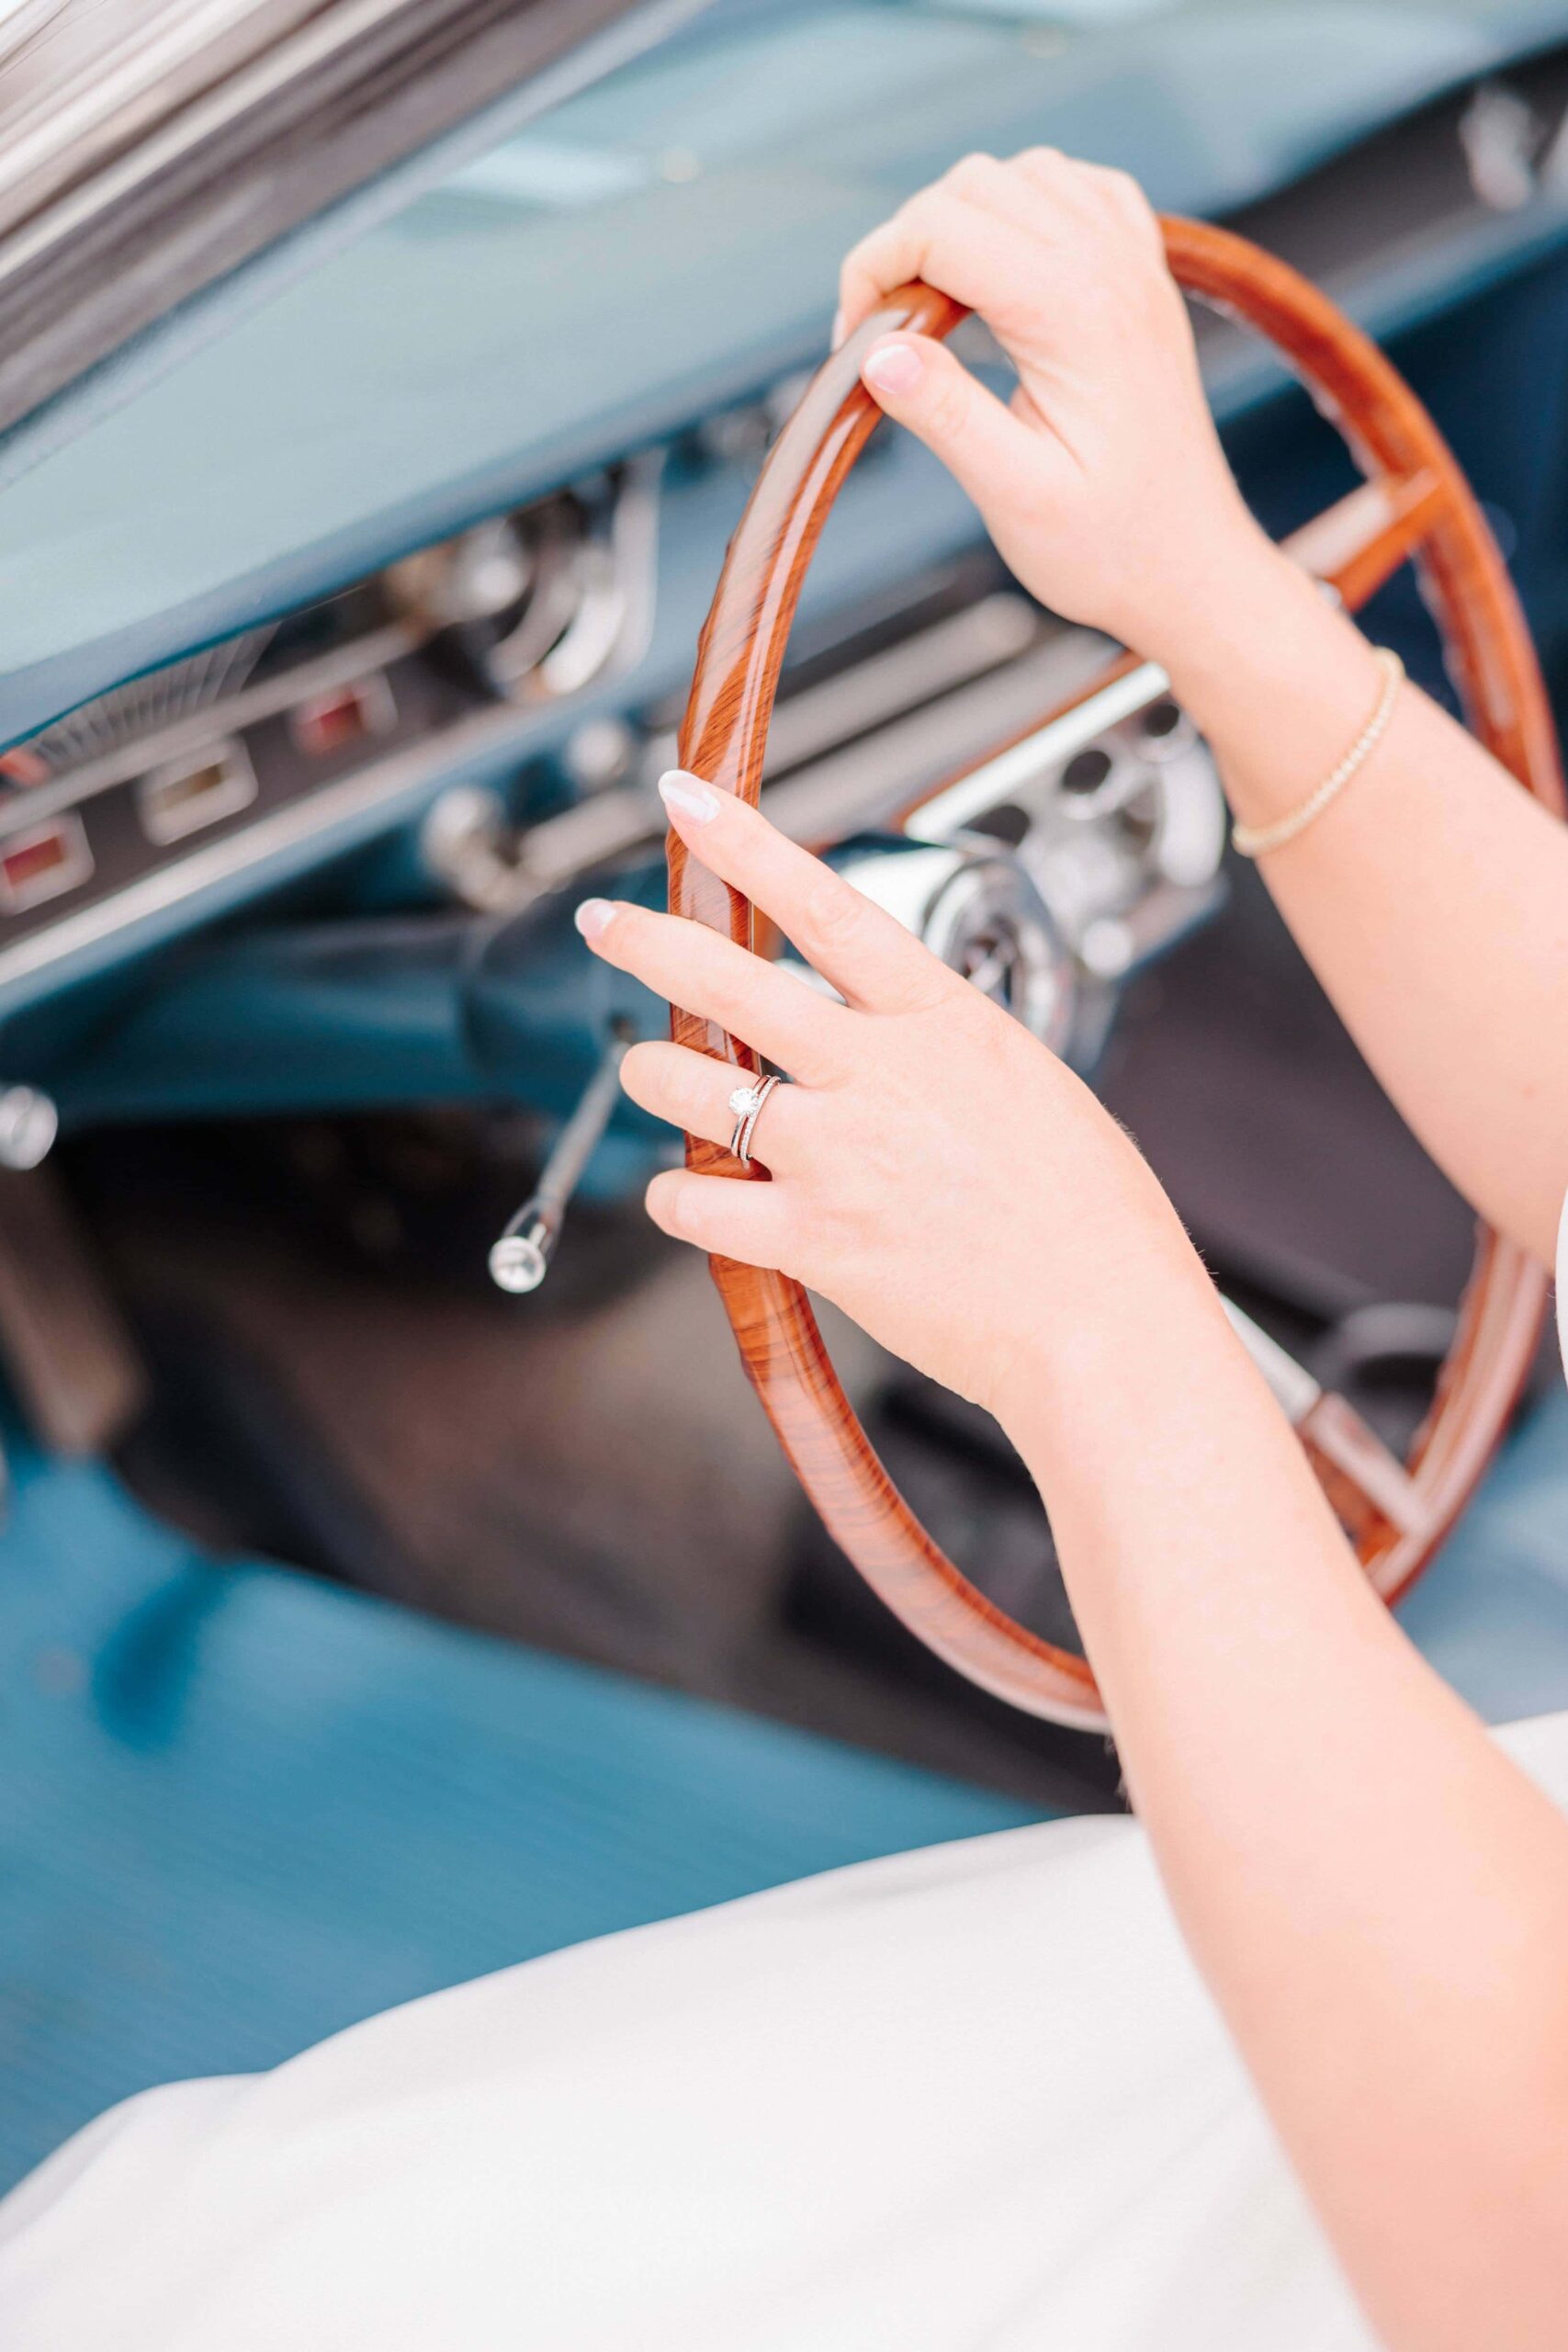 Bailey holds on to the steering wheel of her vintage car for bridal photos.